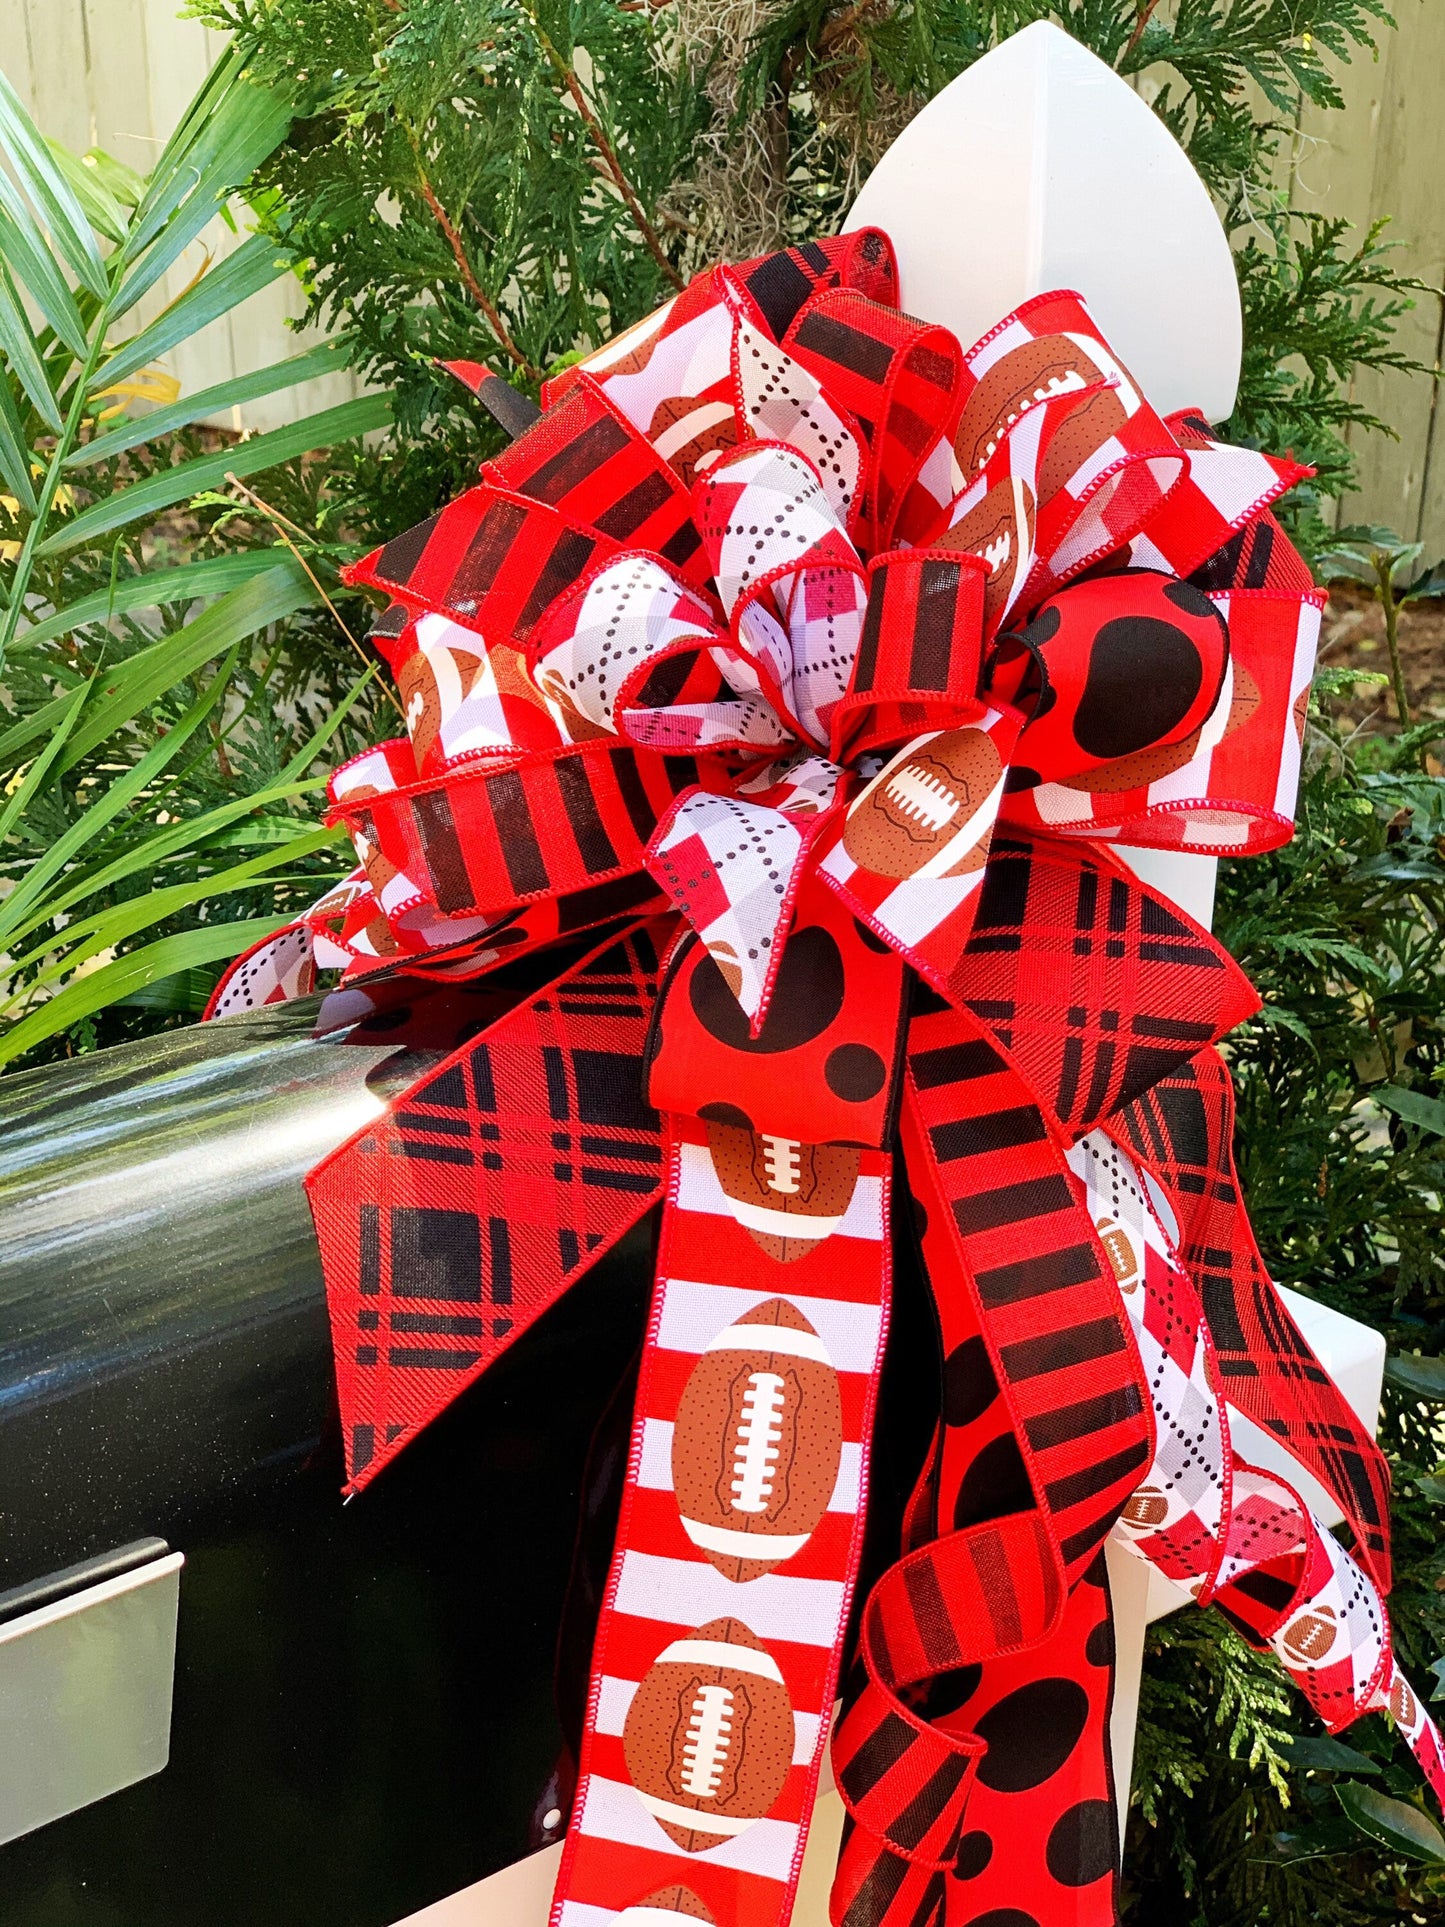 Sports Collection - Red, Black and White Bow, Sports Bow, Bow, Bows, Mailbox Bow, Wreath Bow, Large Bow, Gift Bow, Decor, Decorations